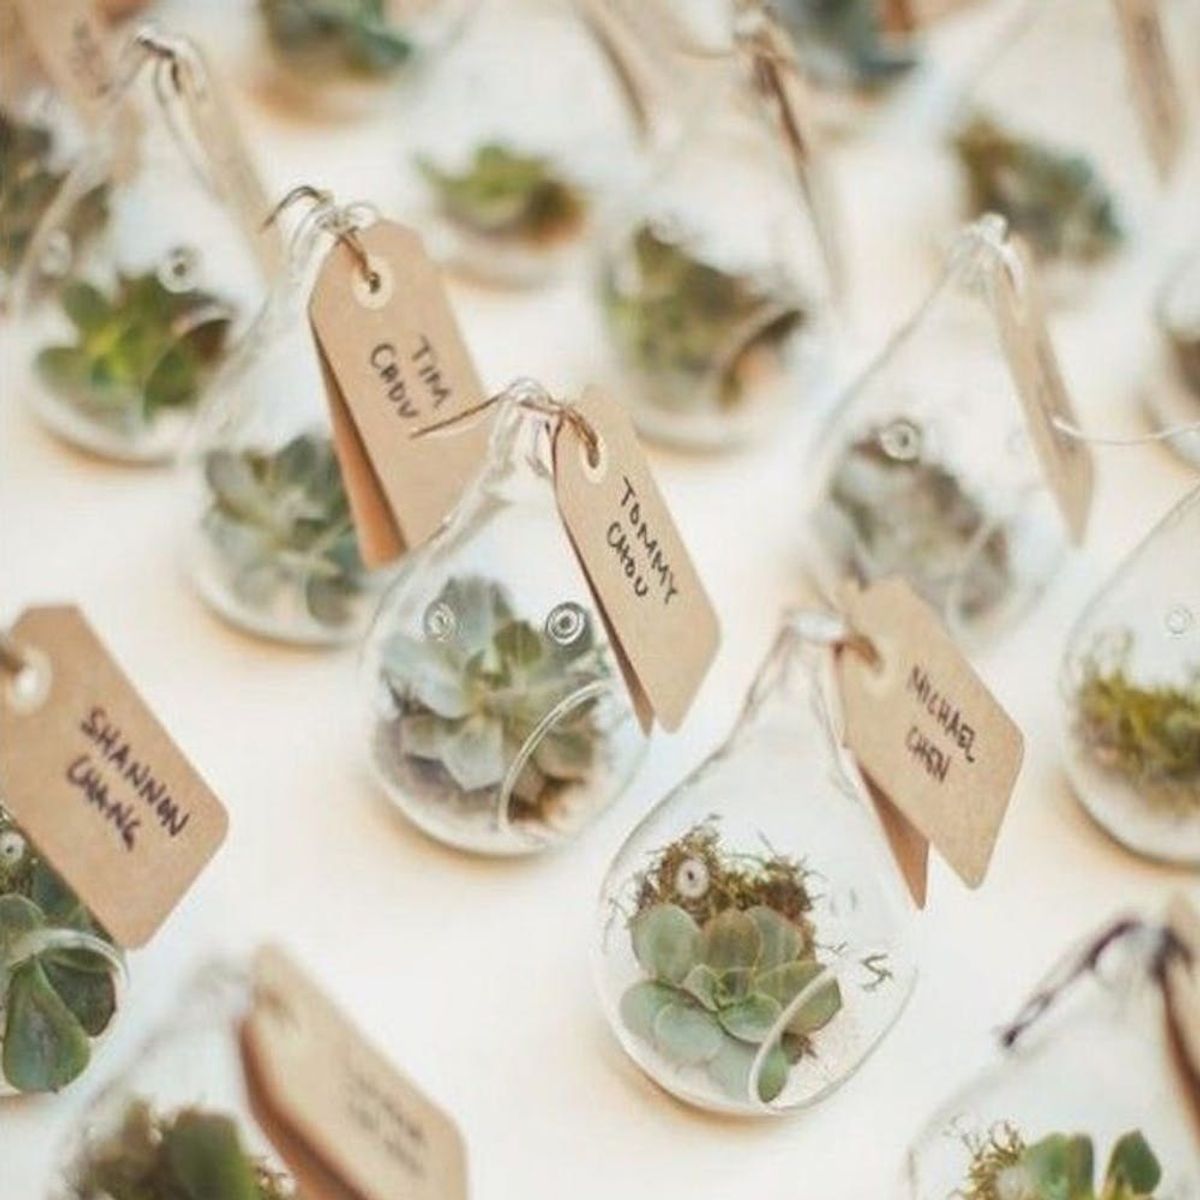 14 Botanical Wedding Favors for Your Greenery-Themed Wedding